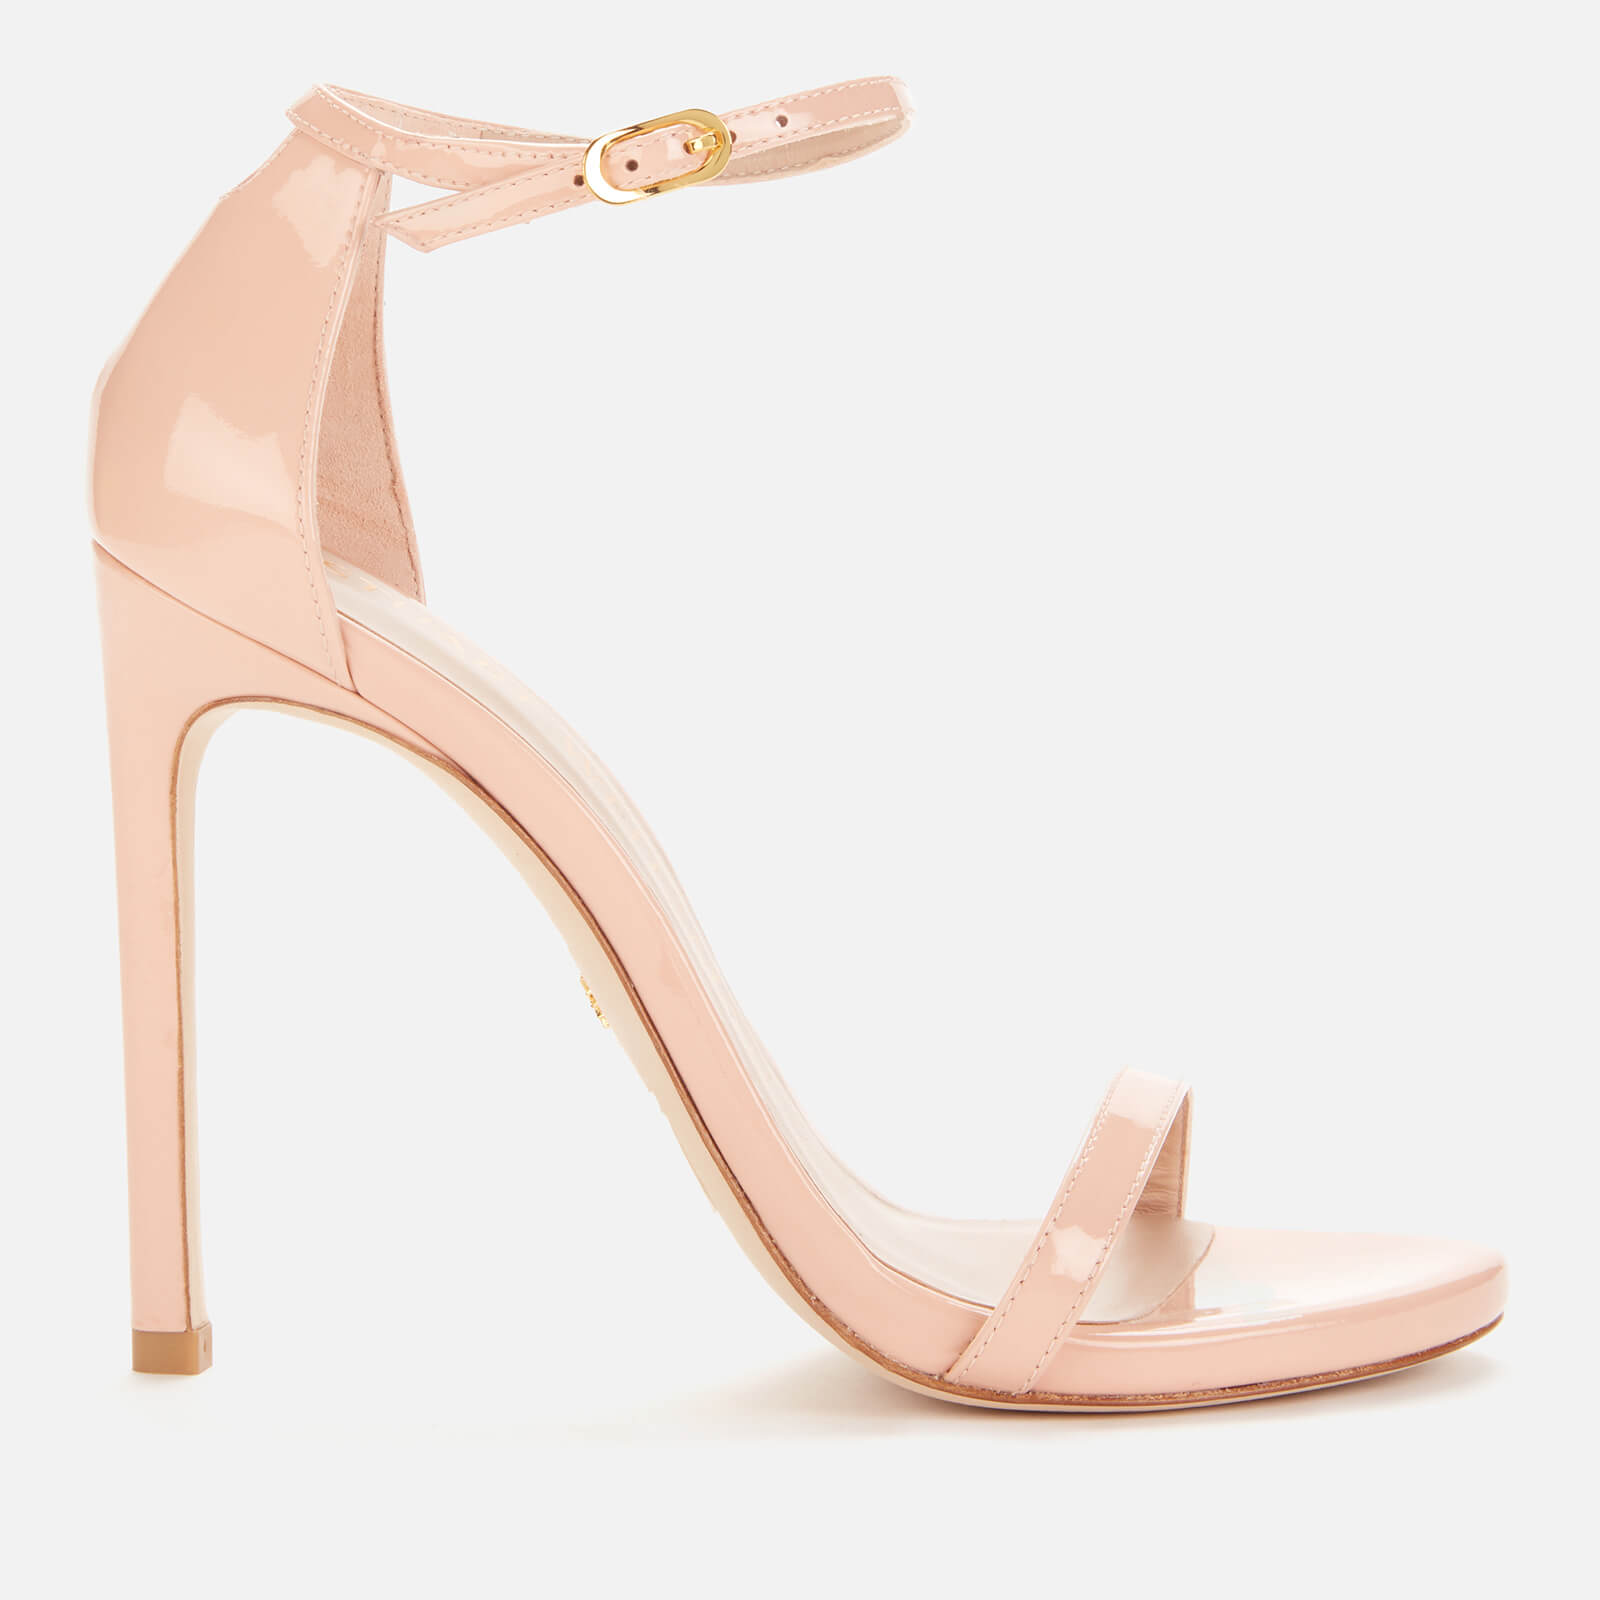 Stuart Weitzman Women's Nudistsong Leather Barely There Heeled Sandals - Poudre - UK 4